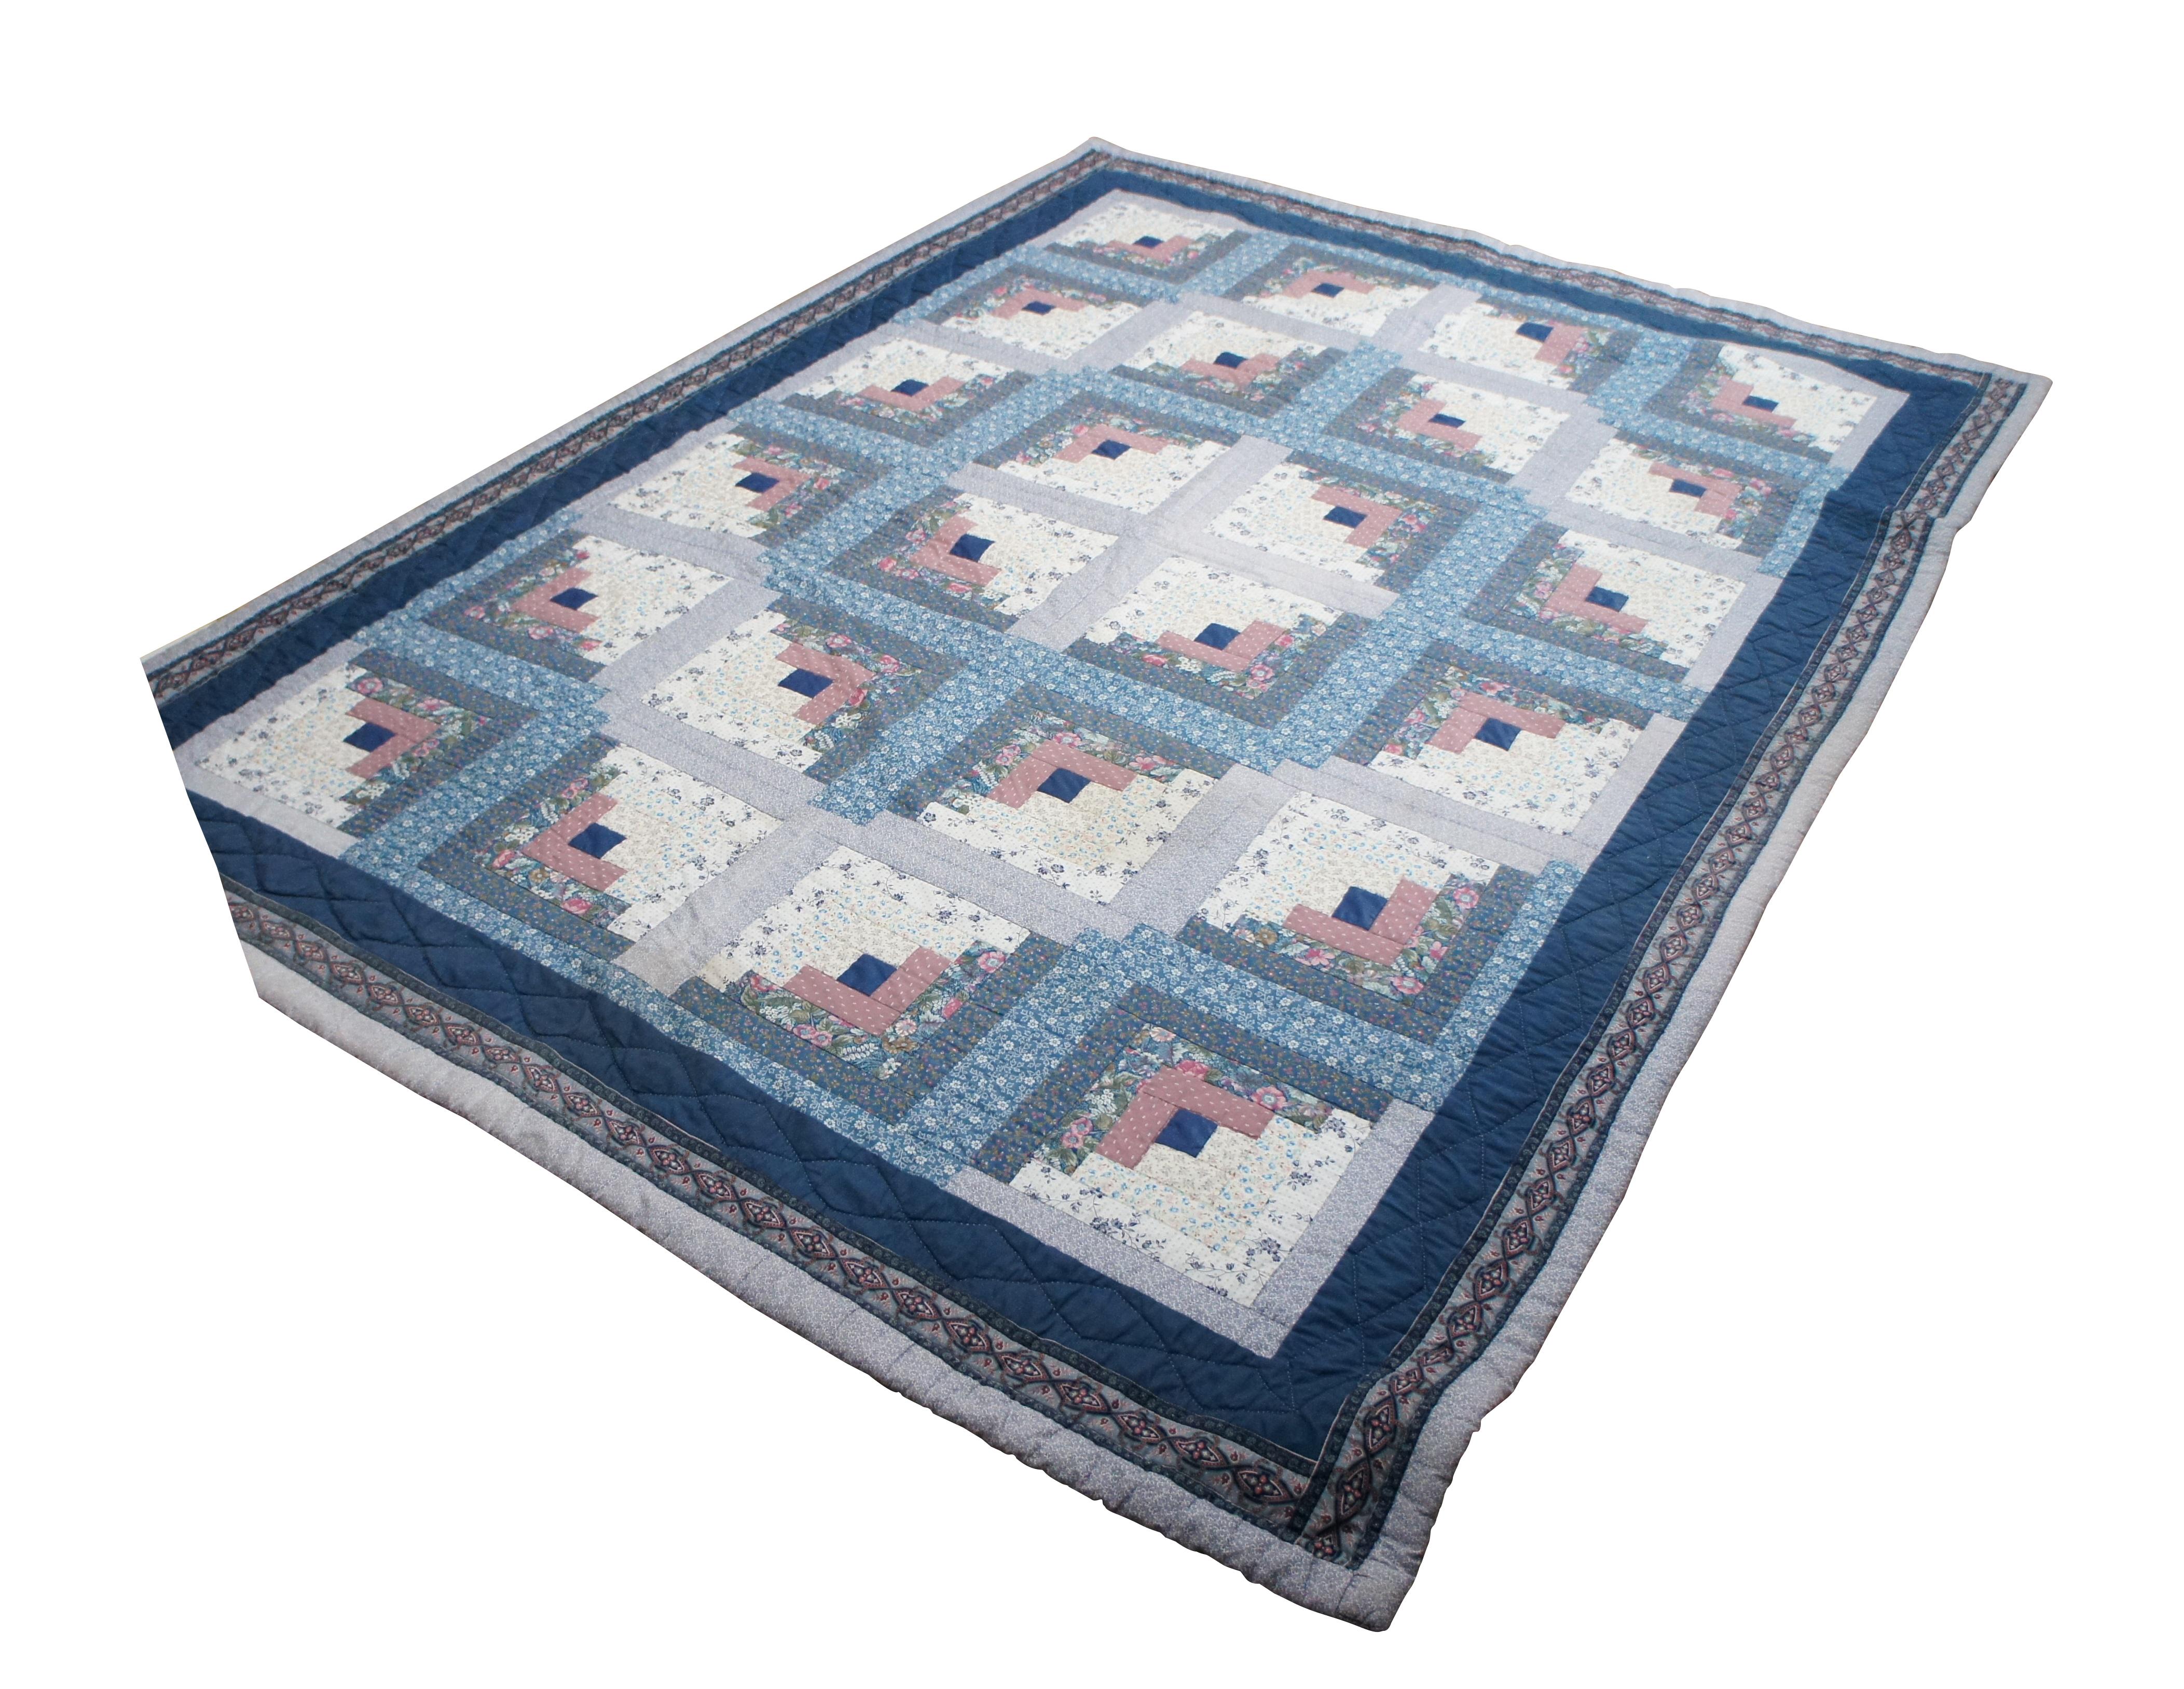 Vintage hand stitched quilt, blanket or bedspread featuring the traditional Log Cabin geometric design with squares, crosses and floral motifs.  Full to queen size.

The Log Cabin block pattern is the oldest of quilt designs, and perhaps the most